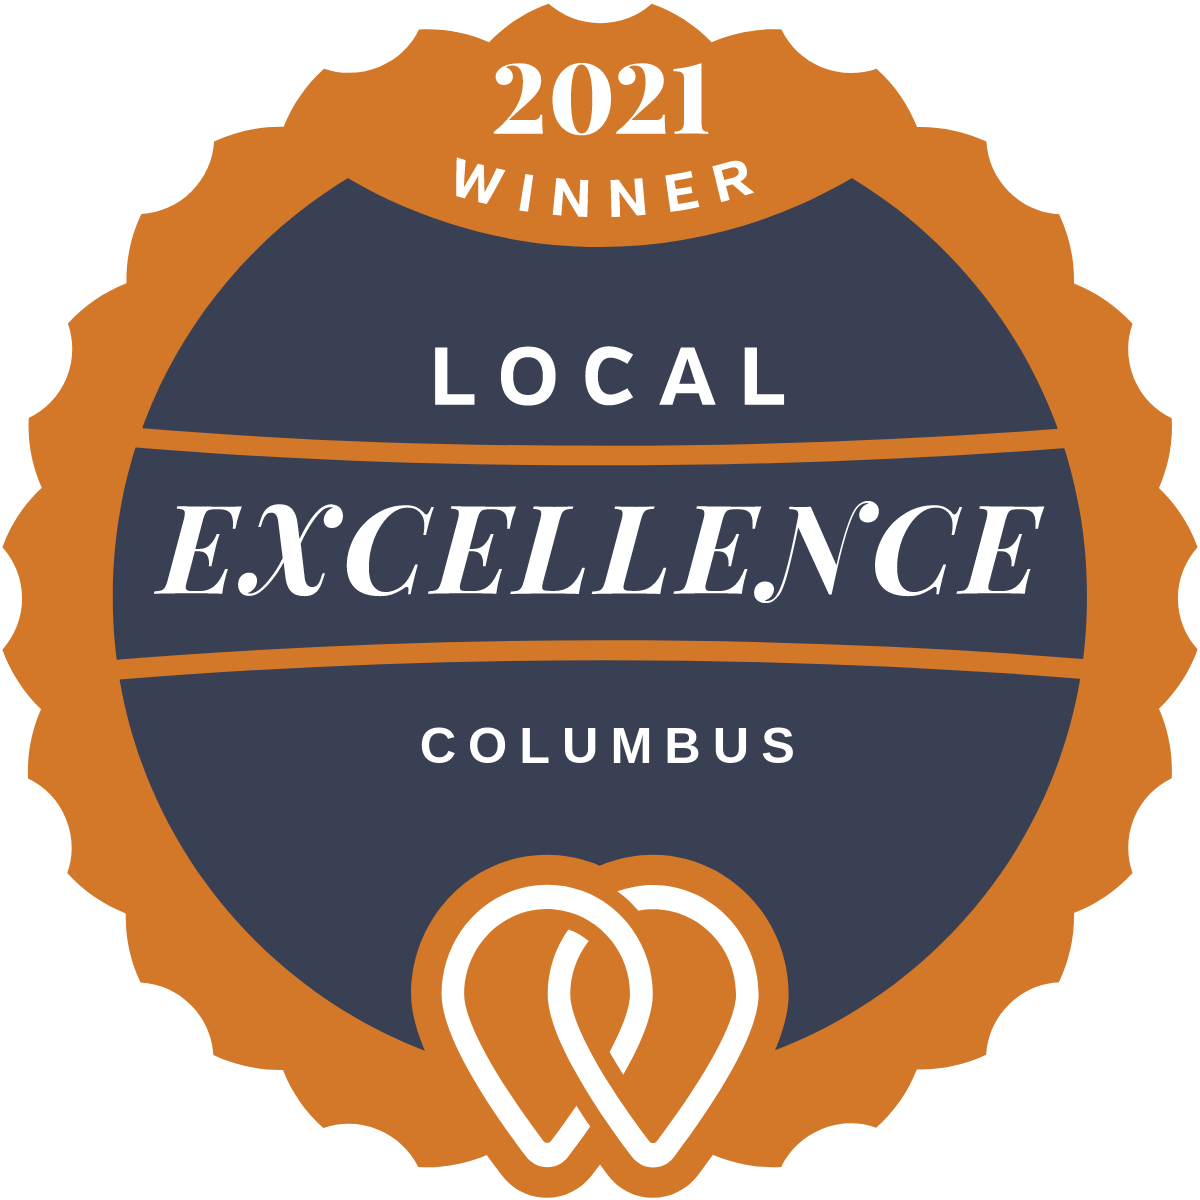 2021 Local Excellence Winner in Columbus, OH